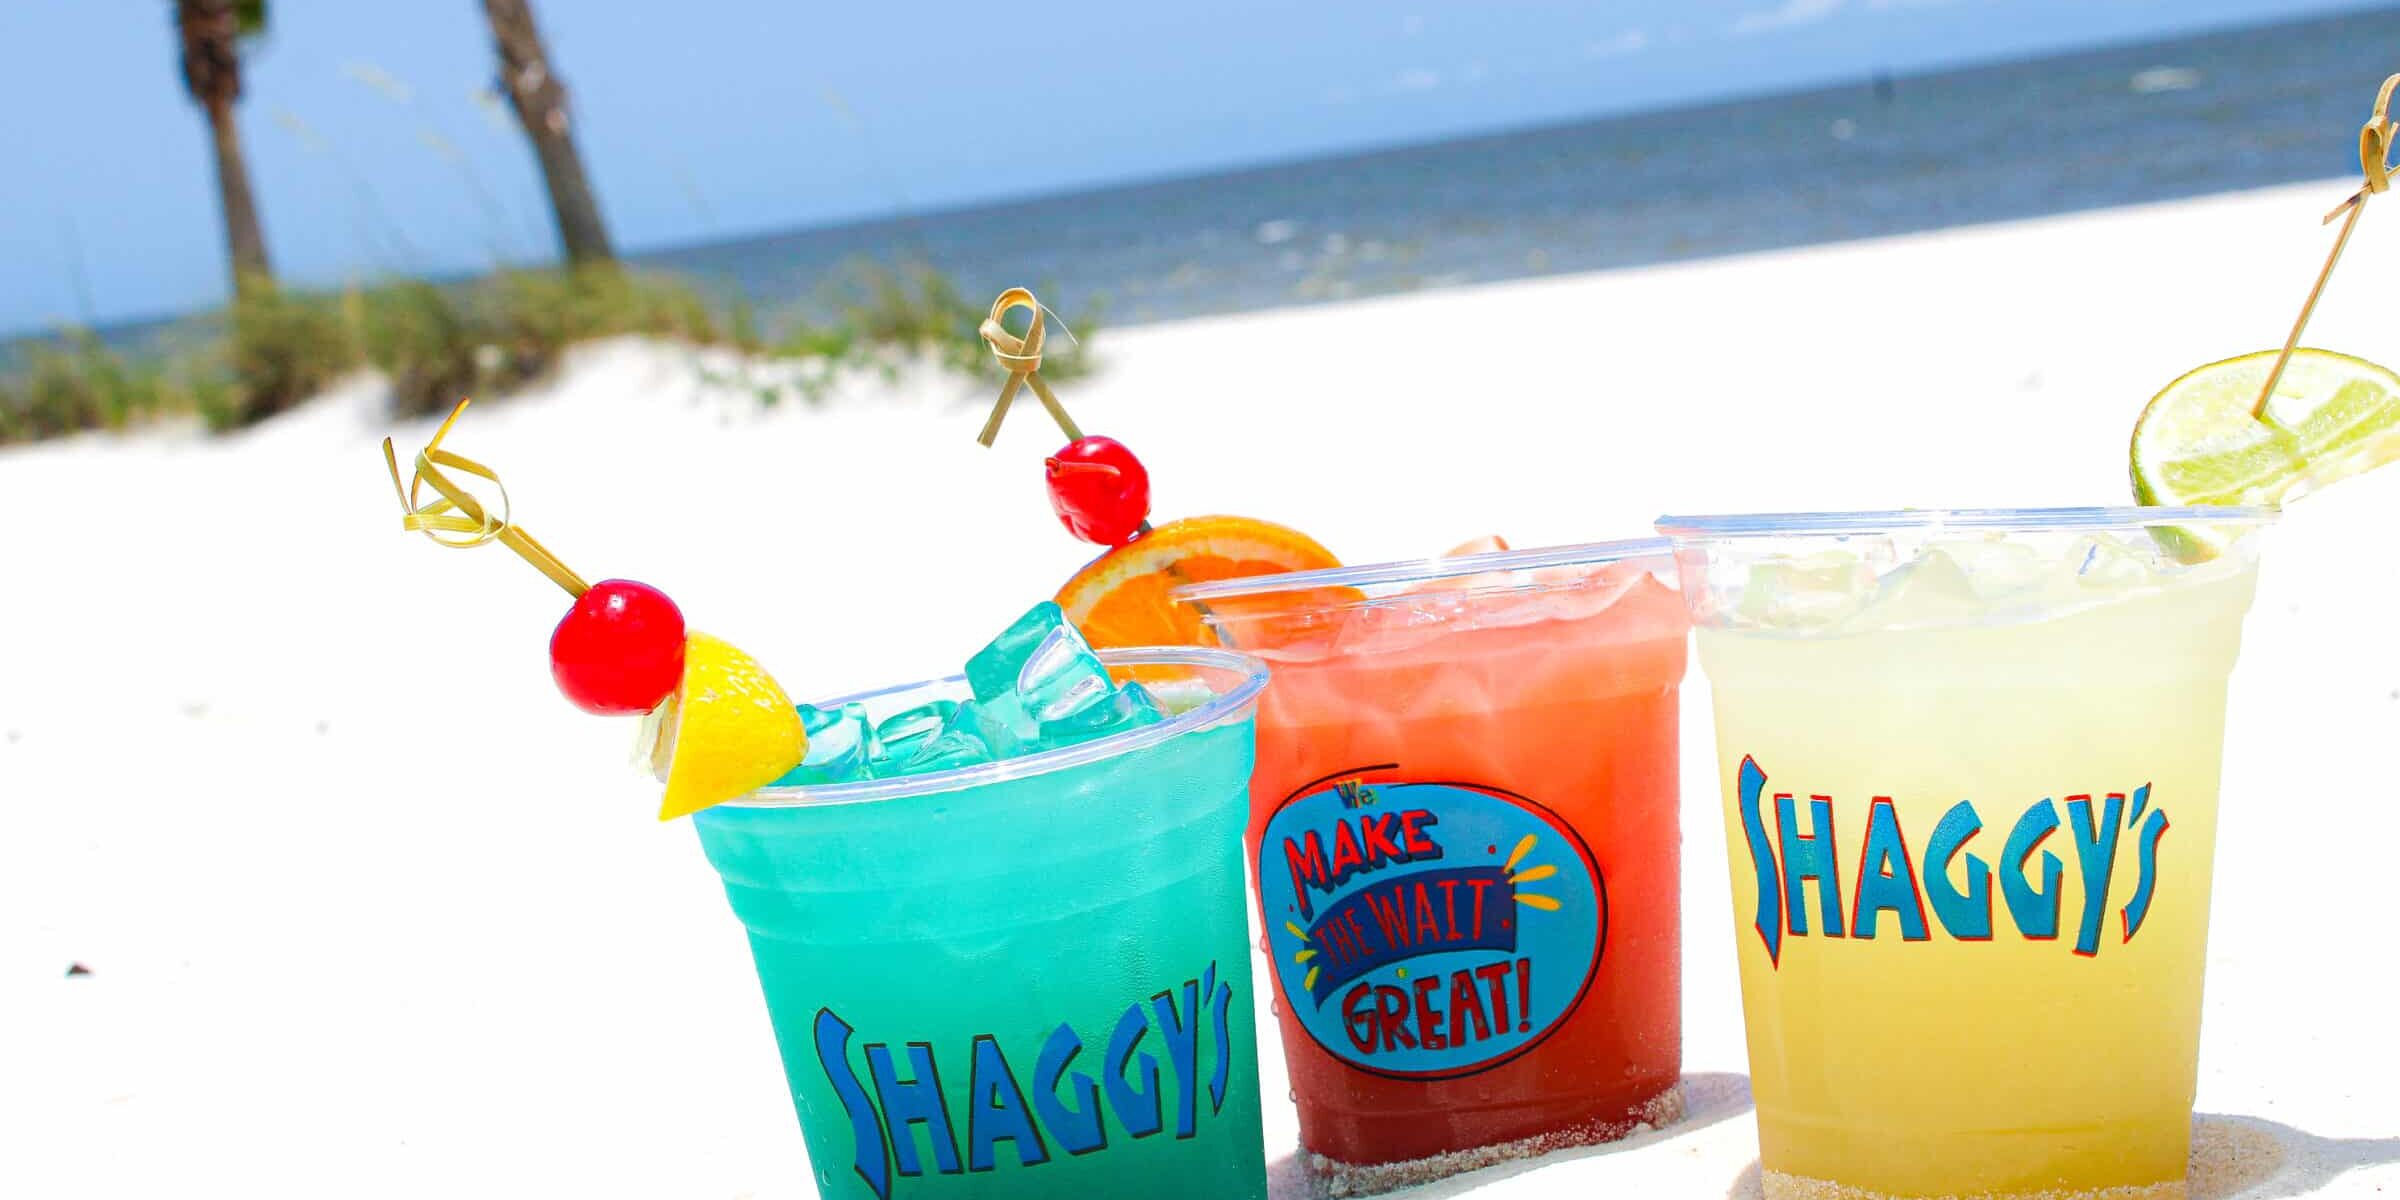 Shaggy's Makes the Wait Great with half-off select drinks when joining the waitlist